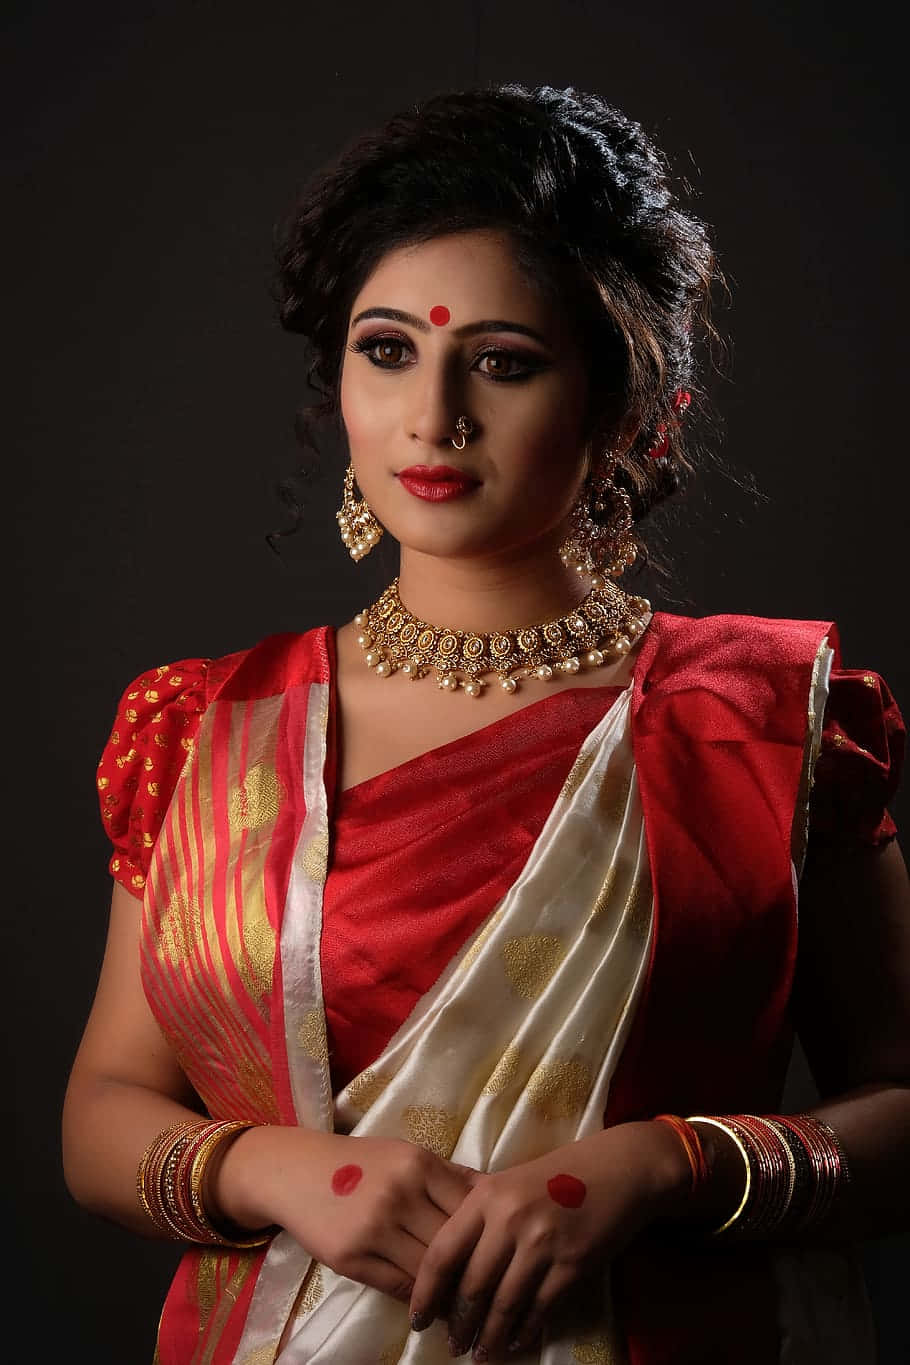 Captivating Indian Beauty In Red Wallpaper